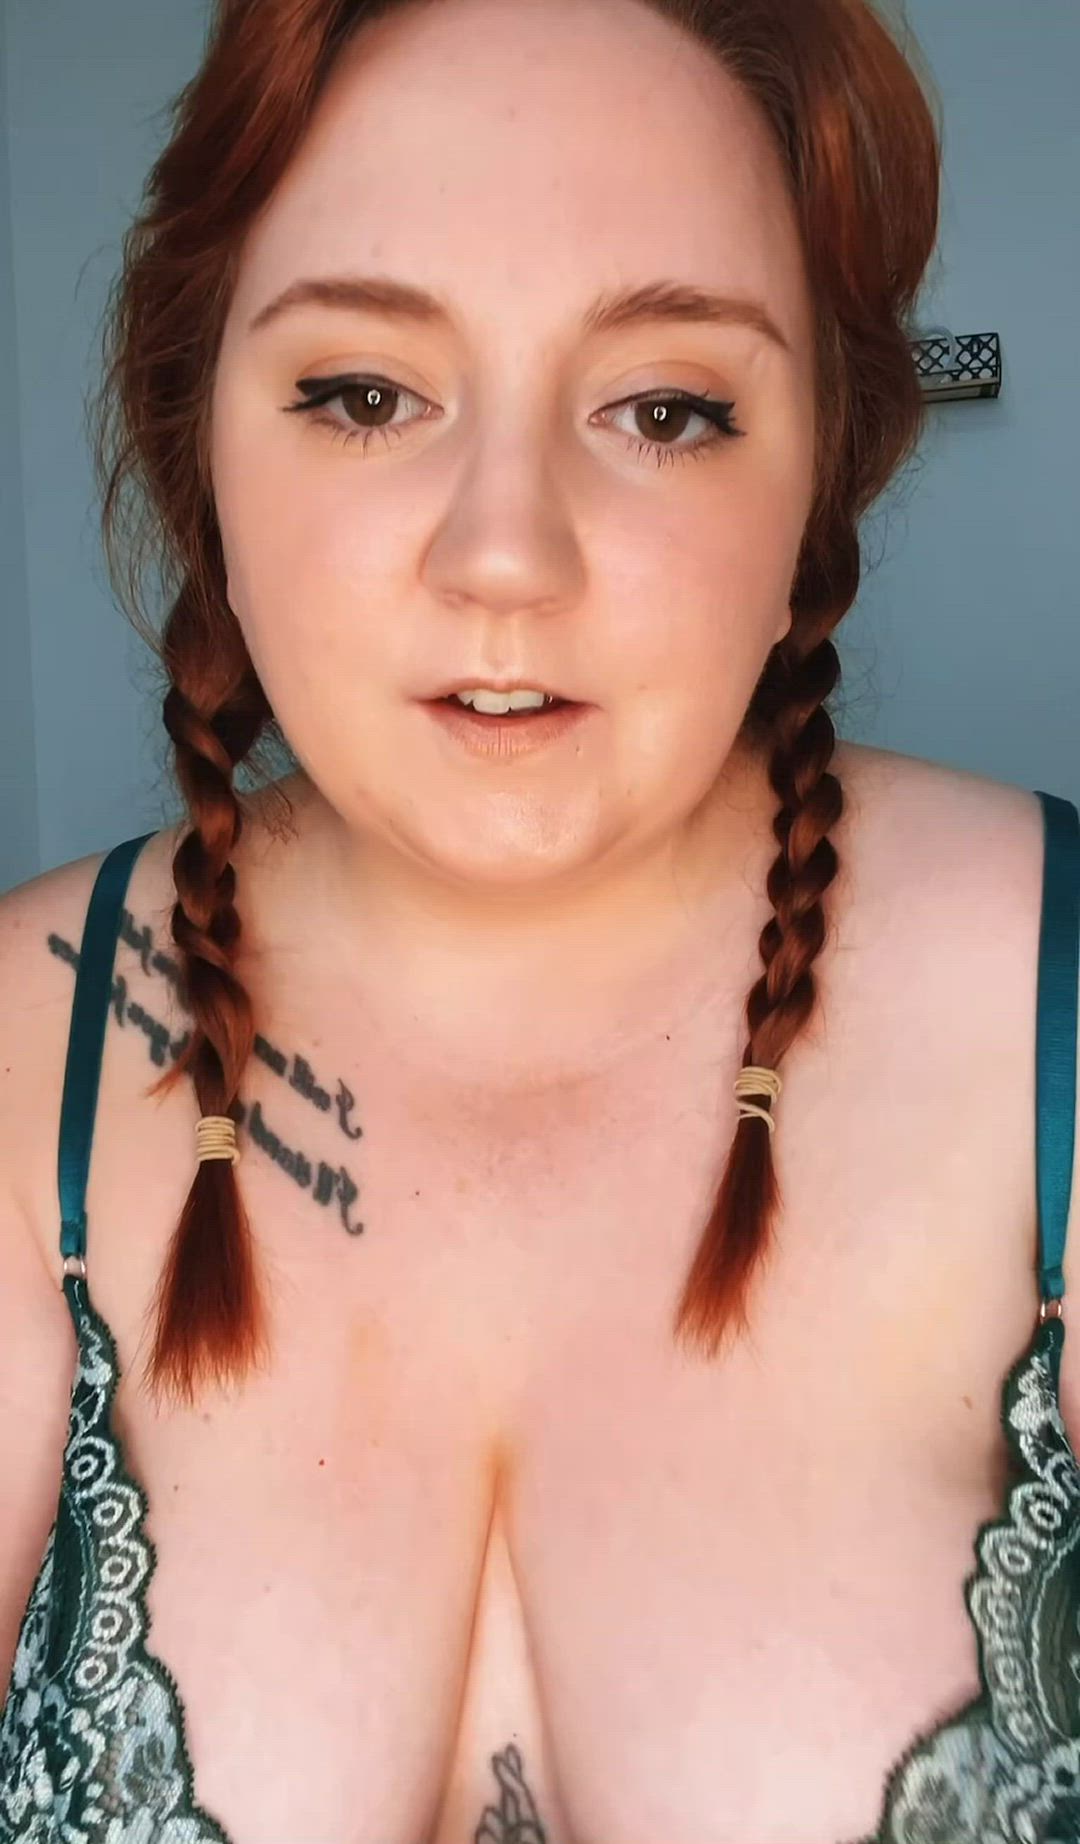 JOI porn video with onlyfans model spicytiktokginger <strong>@spicytiktokginger</strong>